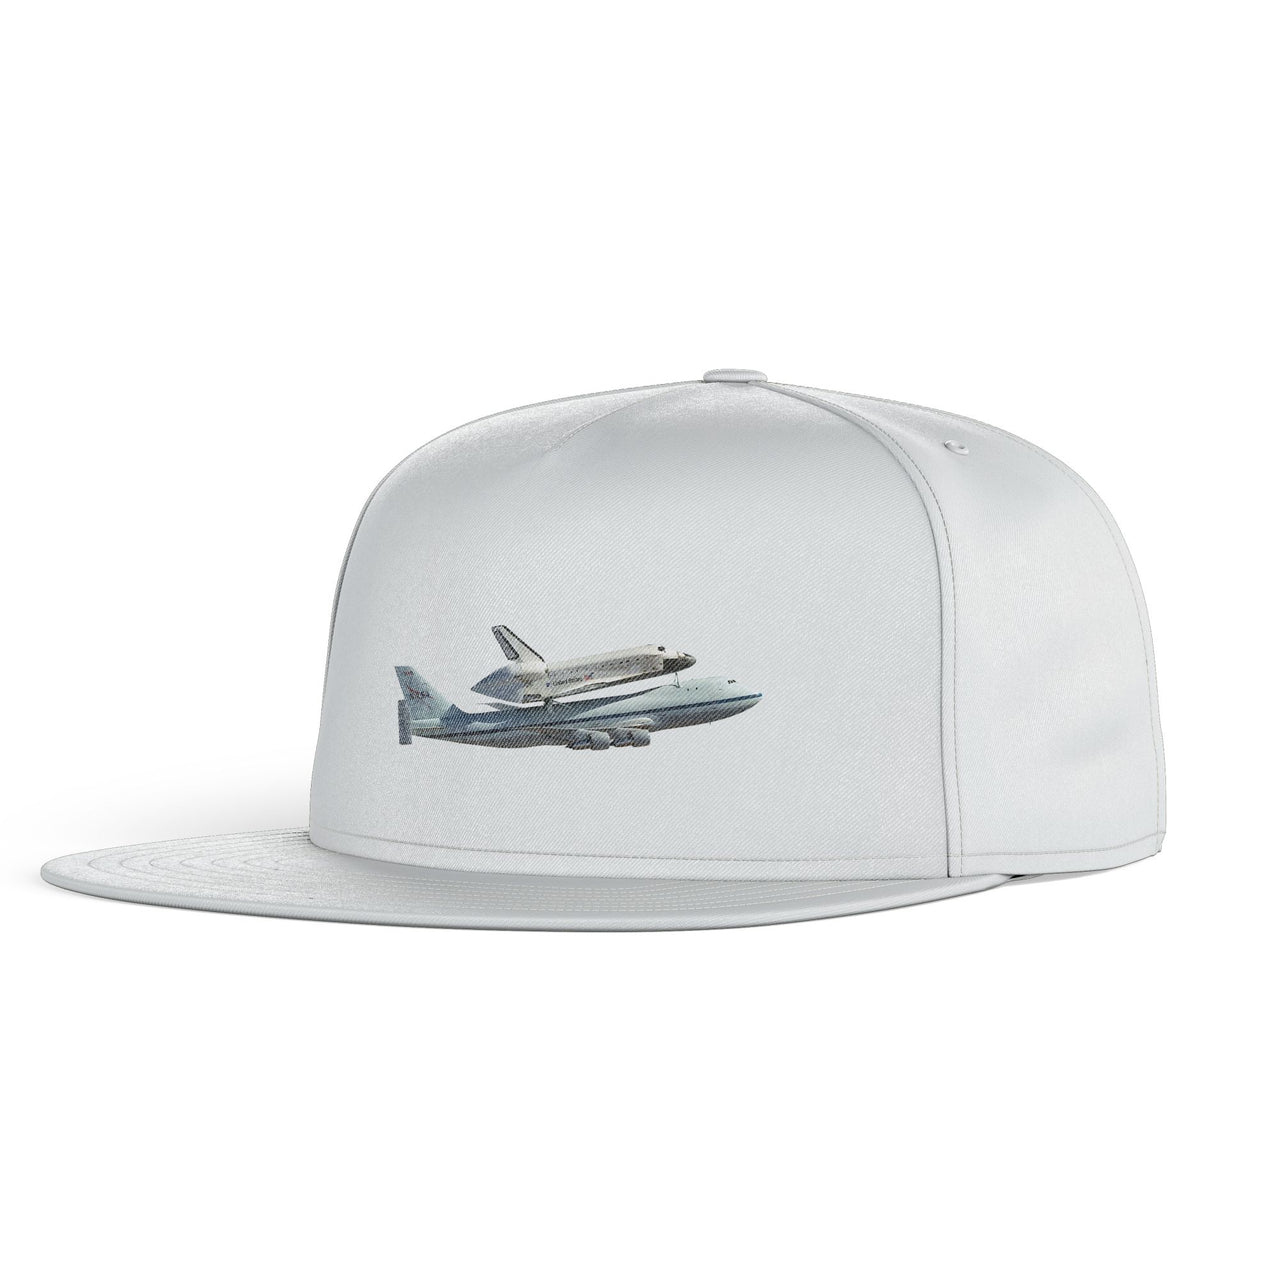 Space shuttle on 747 Designed Snapback Caps & Hats